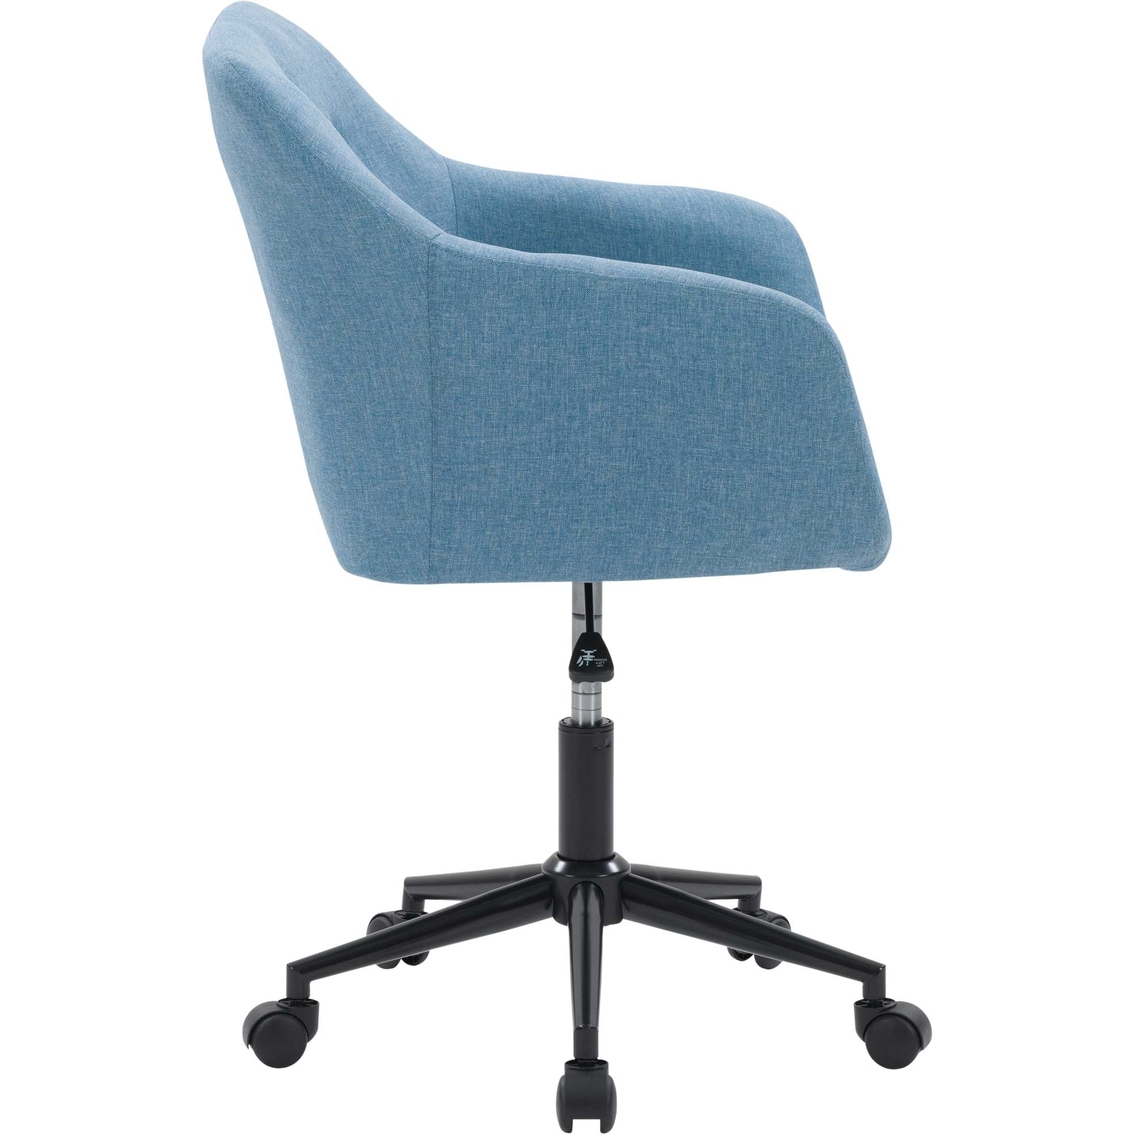 CorLiving Marlowe Upholstered Button Tufted Task Chair - Image 4 of 9